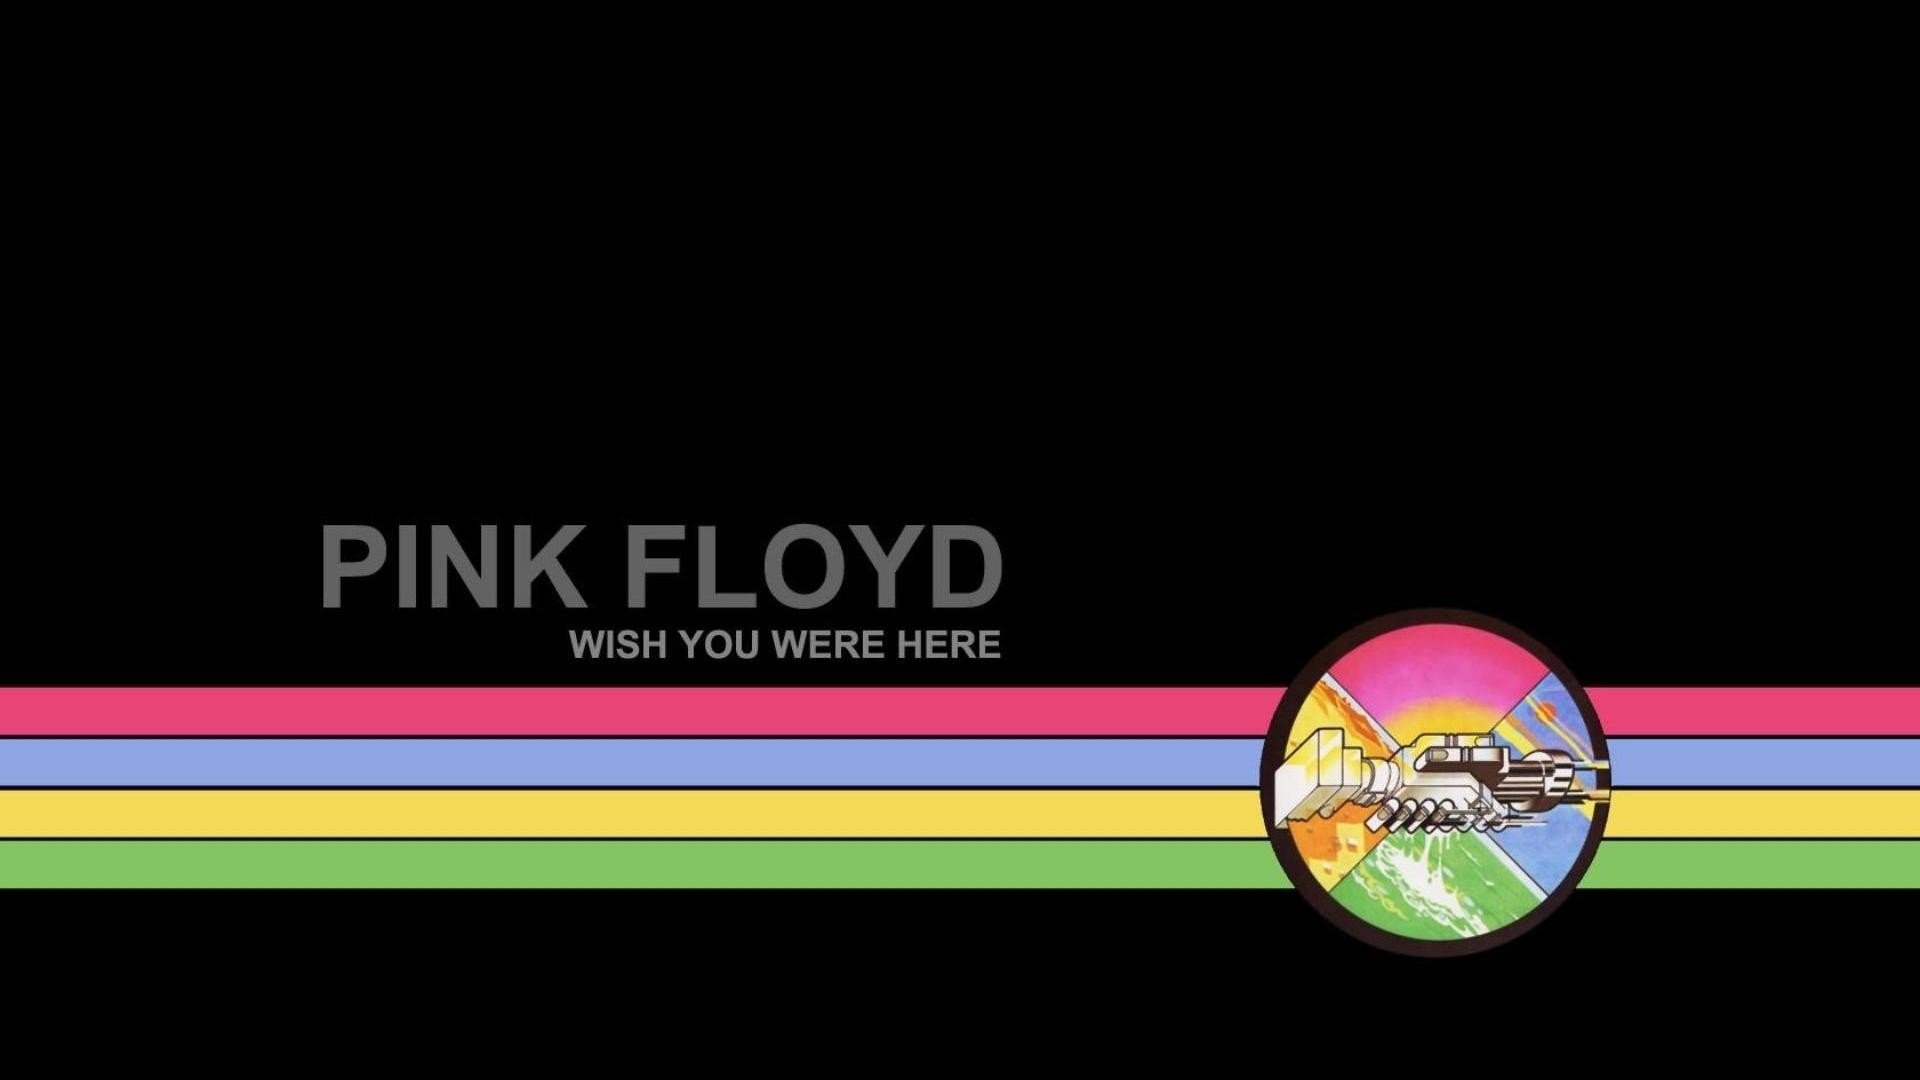 Pink Floyd, Wish you were here Wallpaper